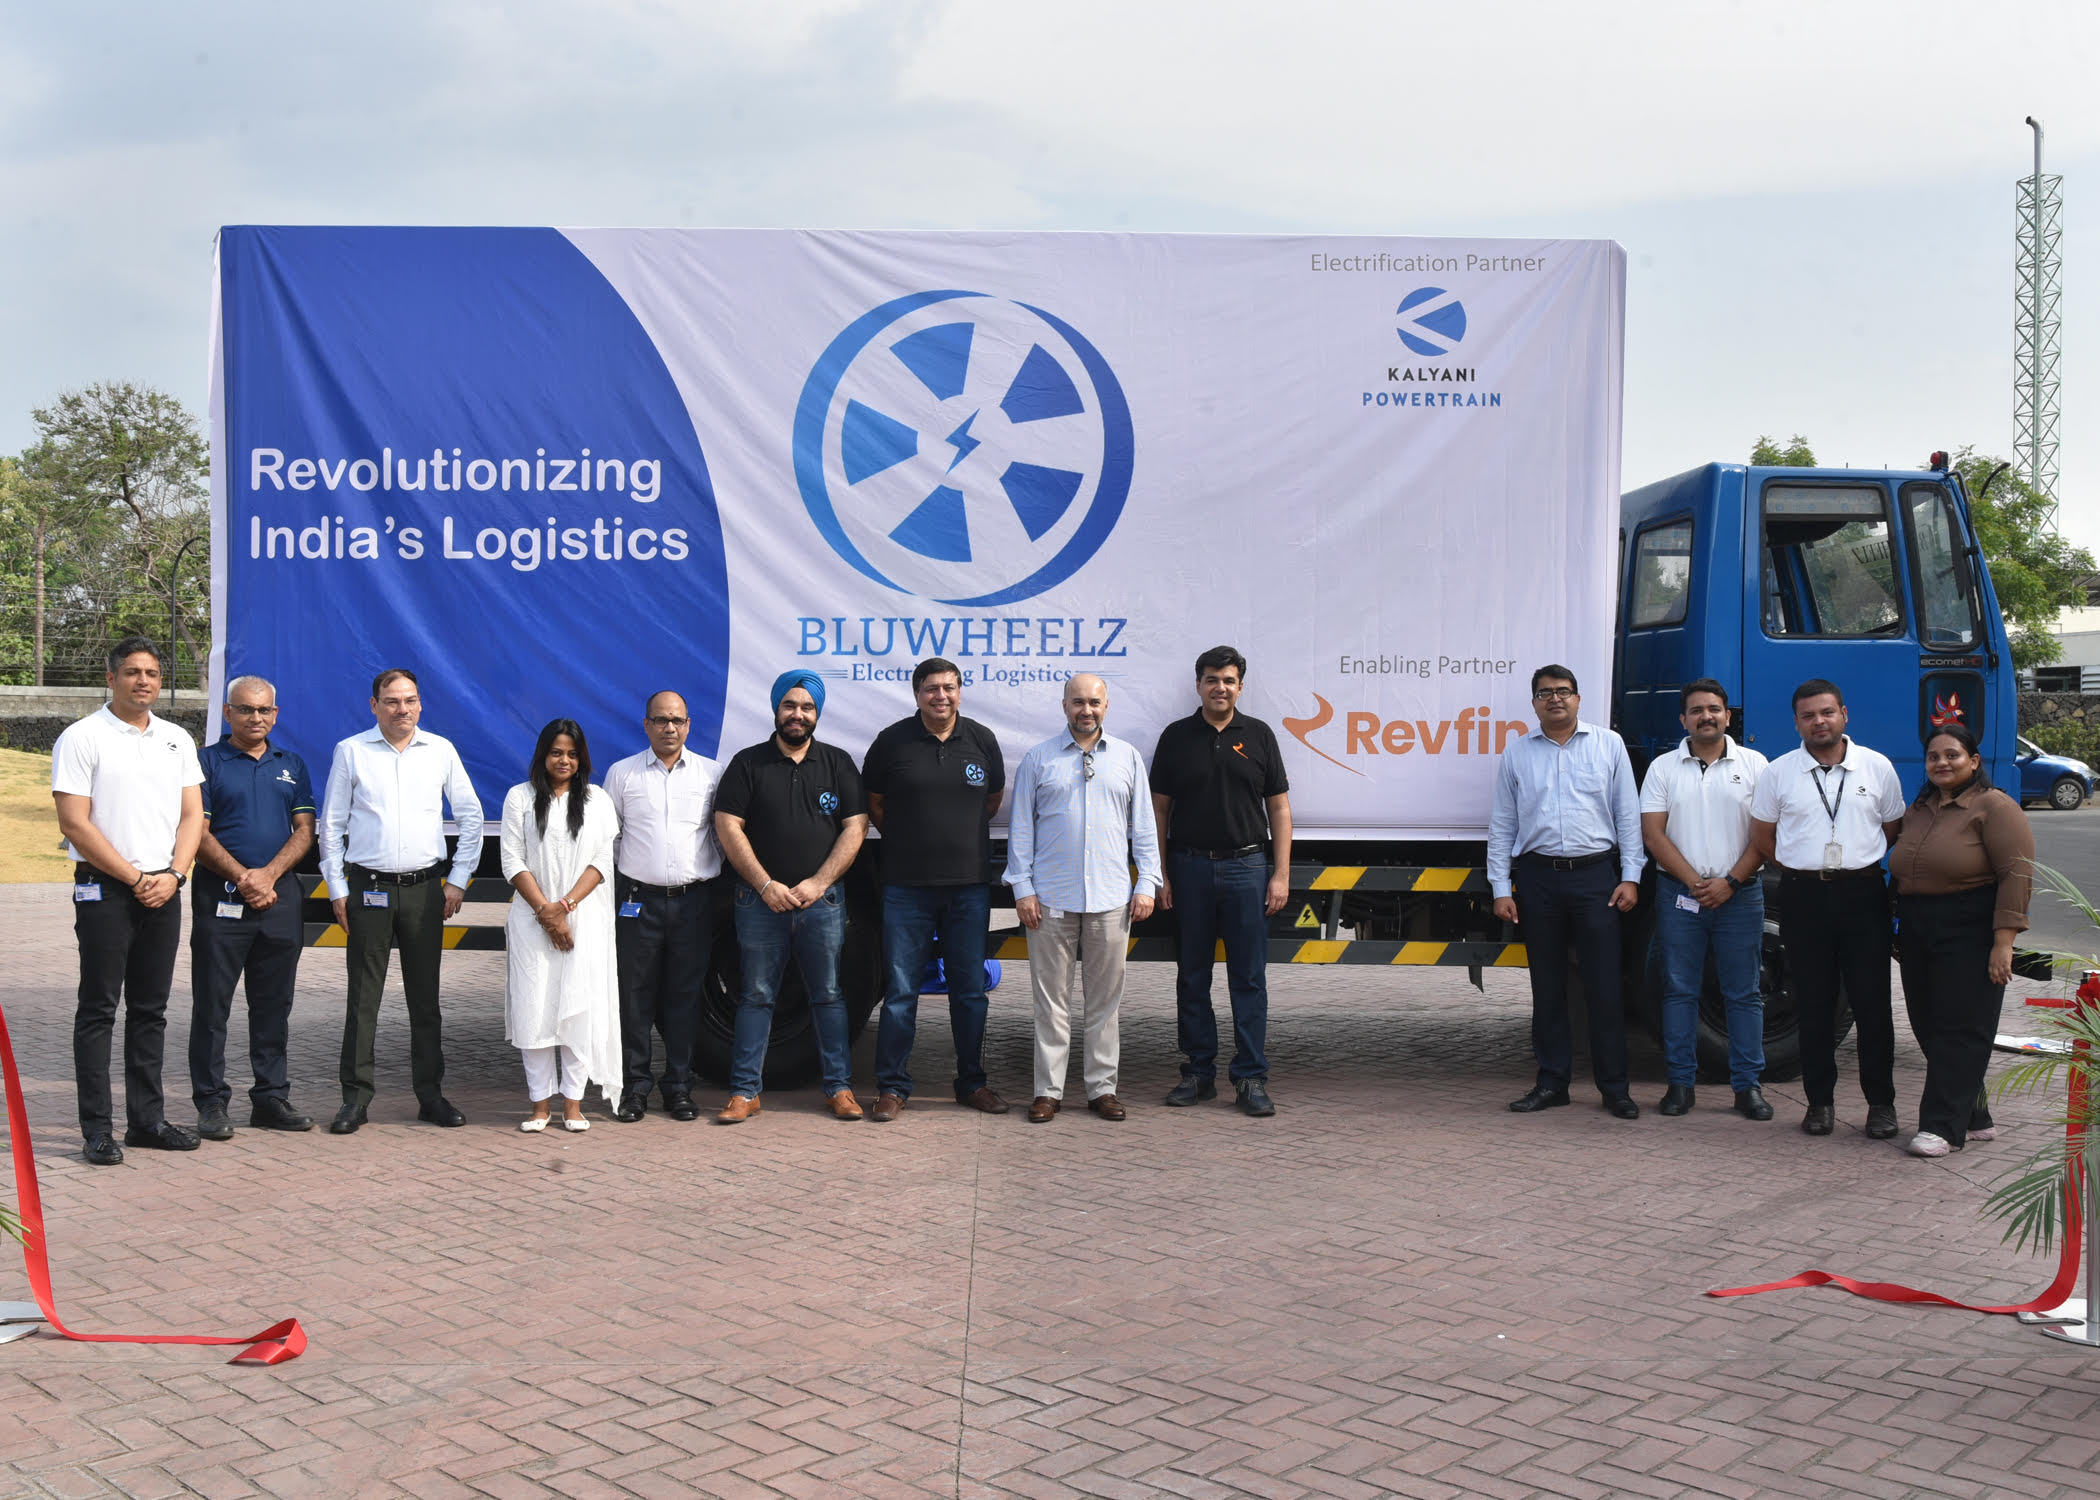 Revfin teams up with Bluwheelz and Kalyani Powertrain to Electrically Retrofit N3 Category Trucks